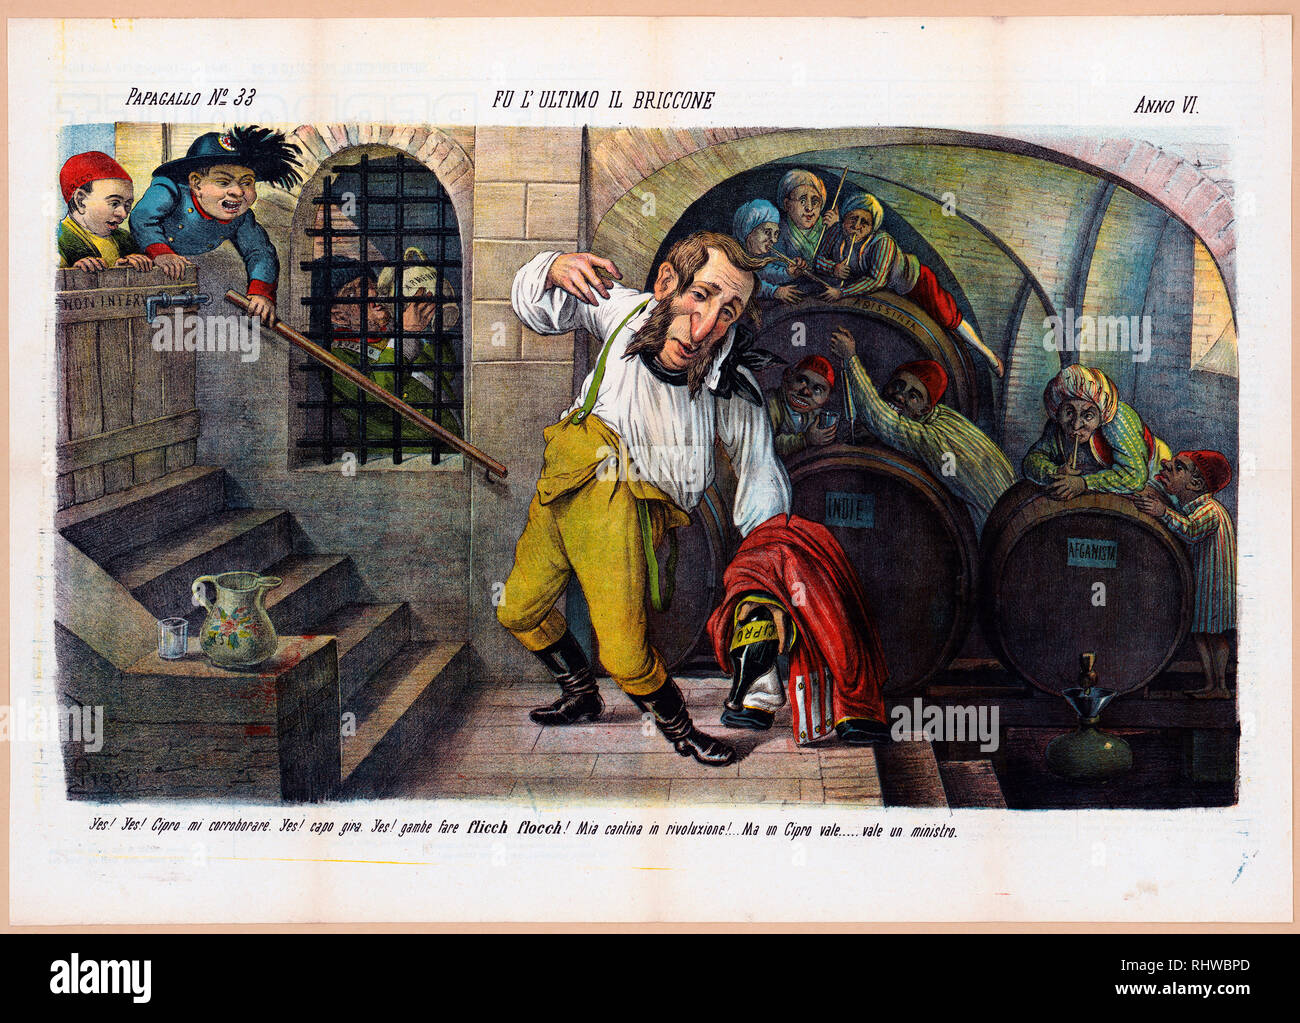 Italian political cartoon shows a drunken Englishman struggling to remain upright at the base of a stairway in a wine cellar, he is holding an empty bottle labeled 'Cipro' at his side, behind him is a wine barrel labeled 'Indie' with two men labeled 'Ayah' and 'Emir' extracting wine, a wine barrel labeled 'Afganista' with two men labeled 'Tartaro' and 'Indigens', and a barrel in the background labeled 'Abissinia' from which three men are drinking wine. Stock Photo